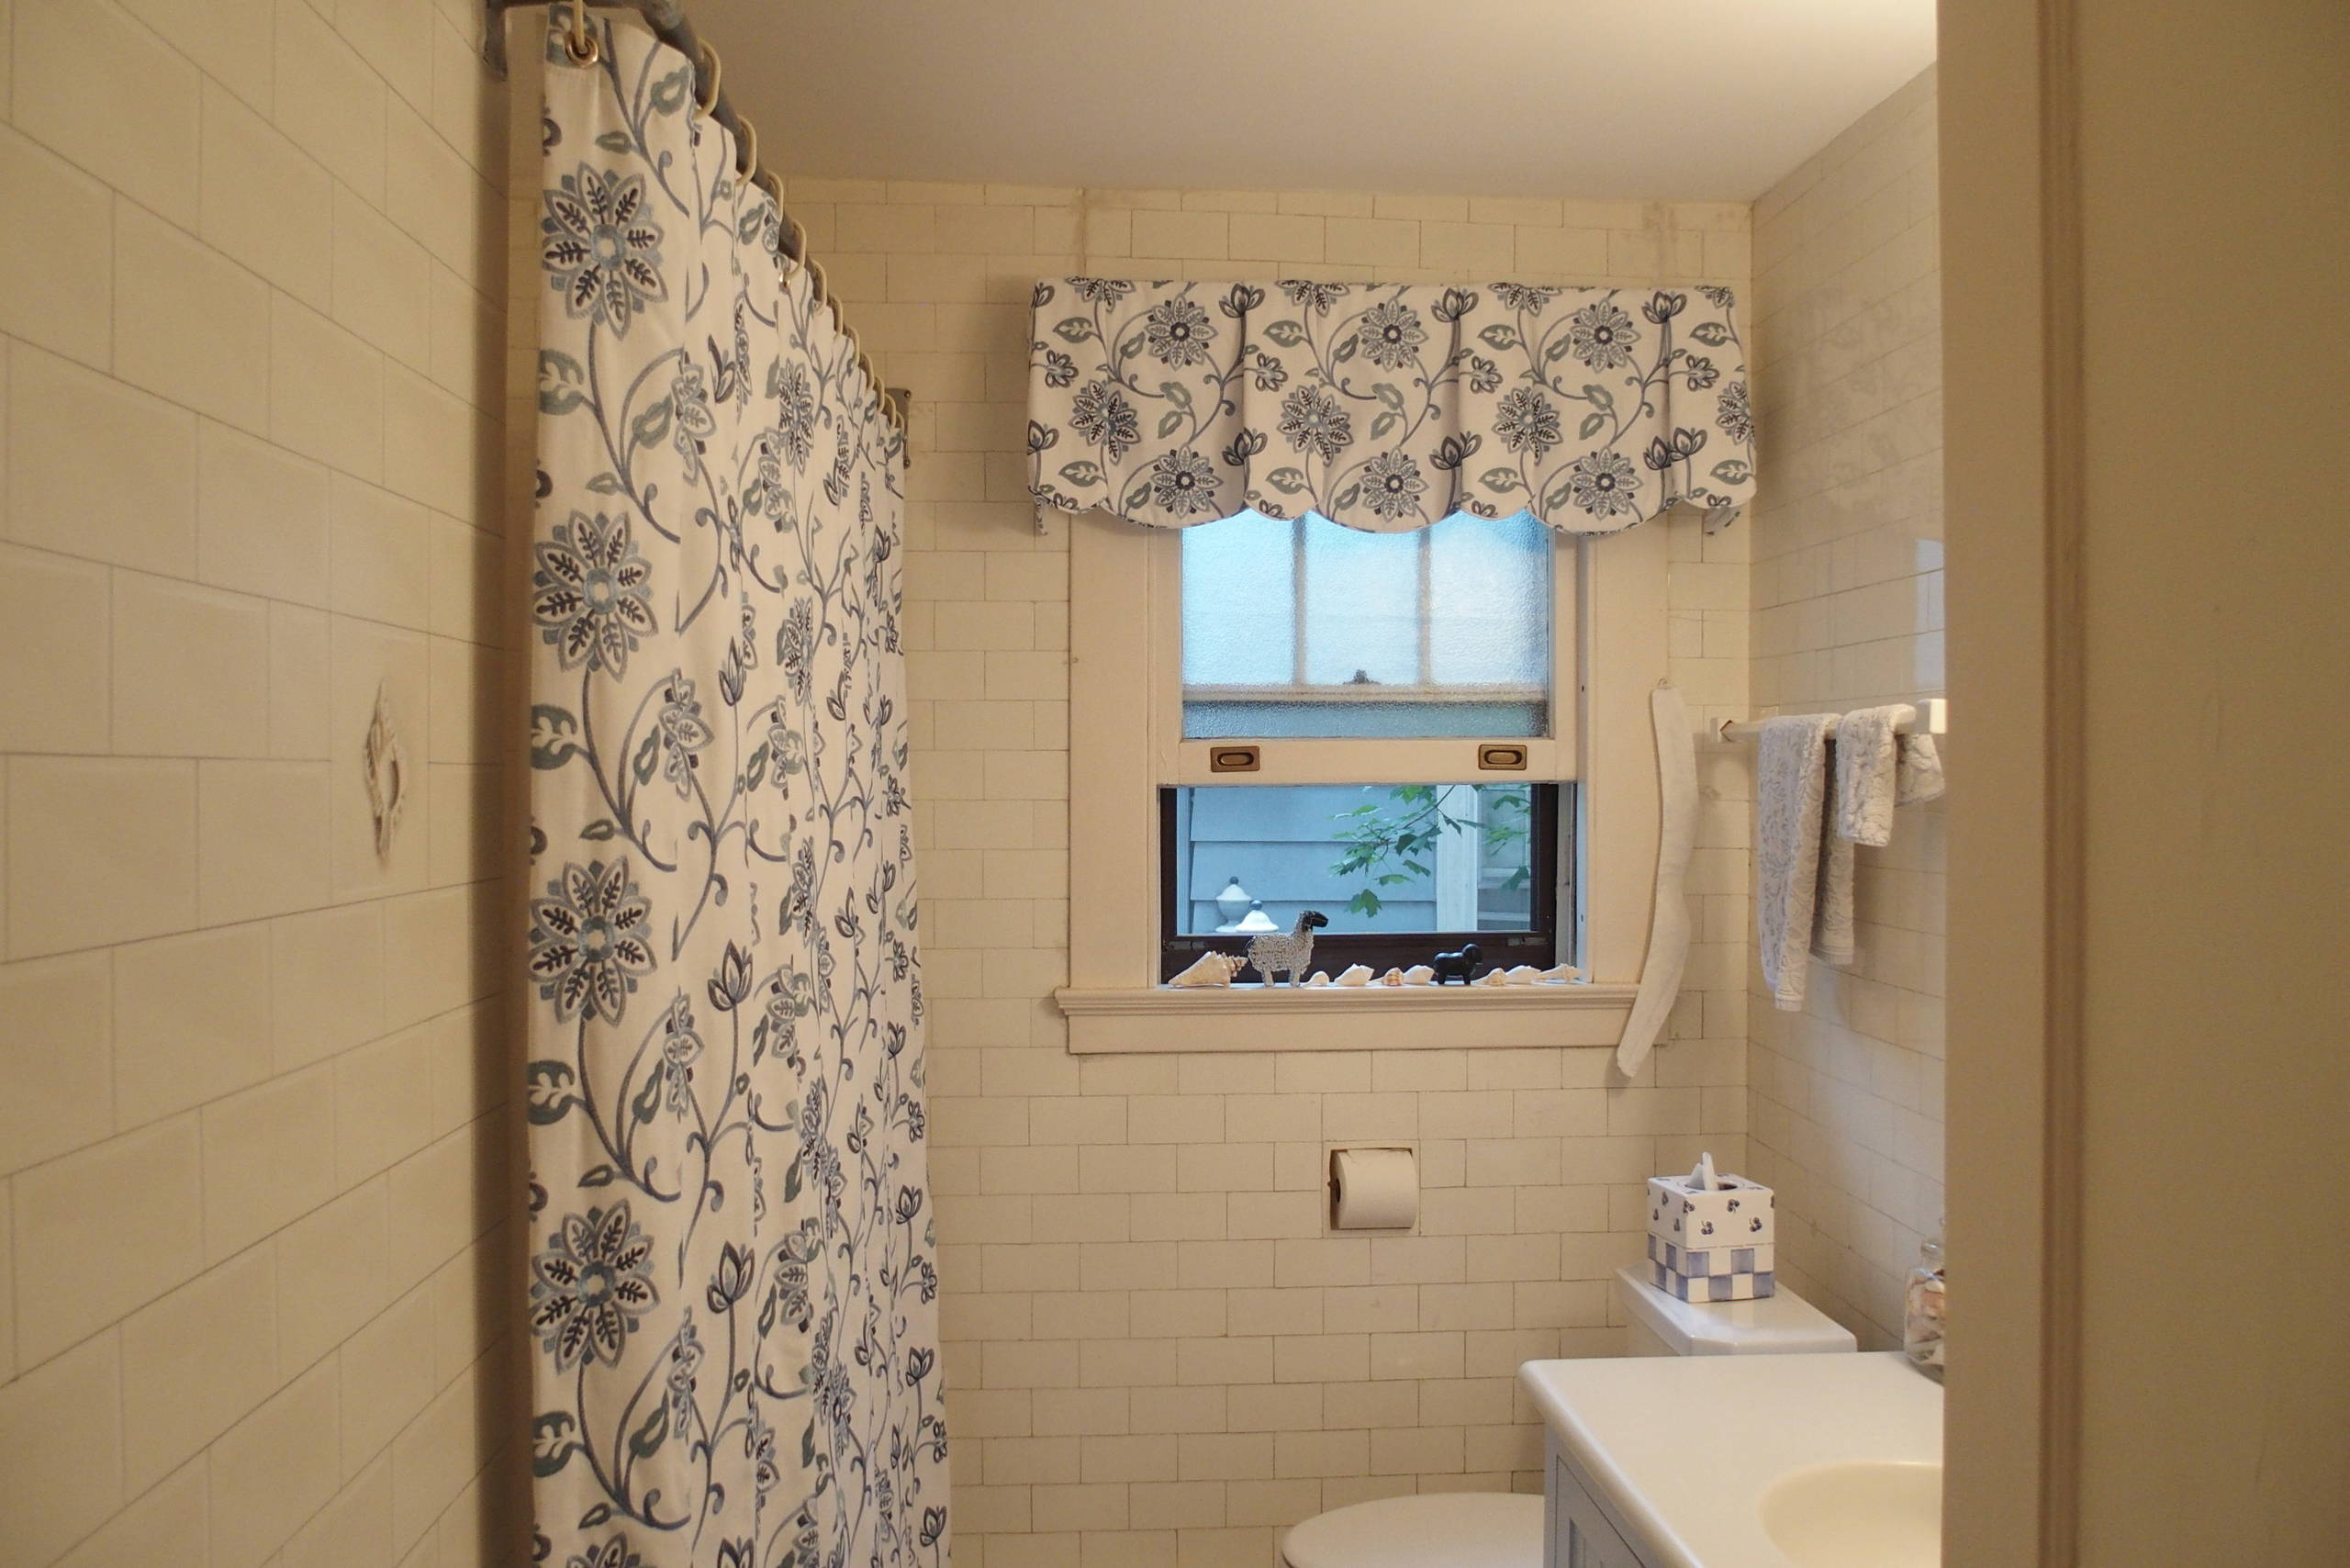 Bathroom makeover in blue and white